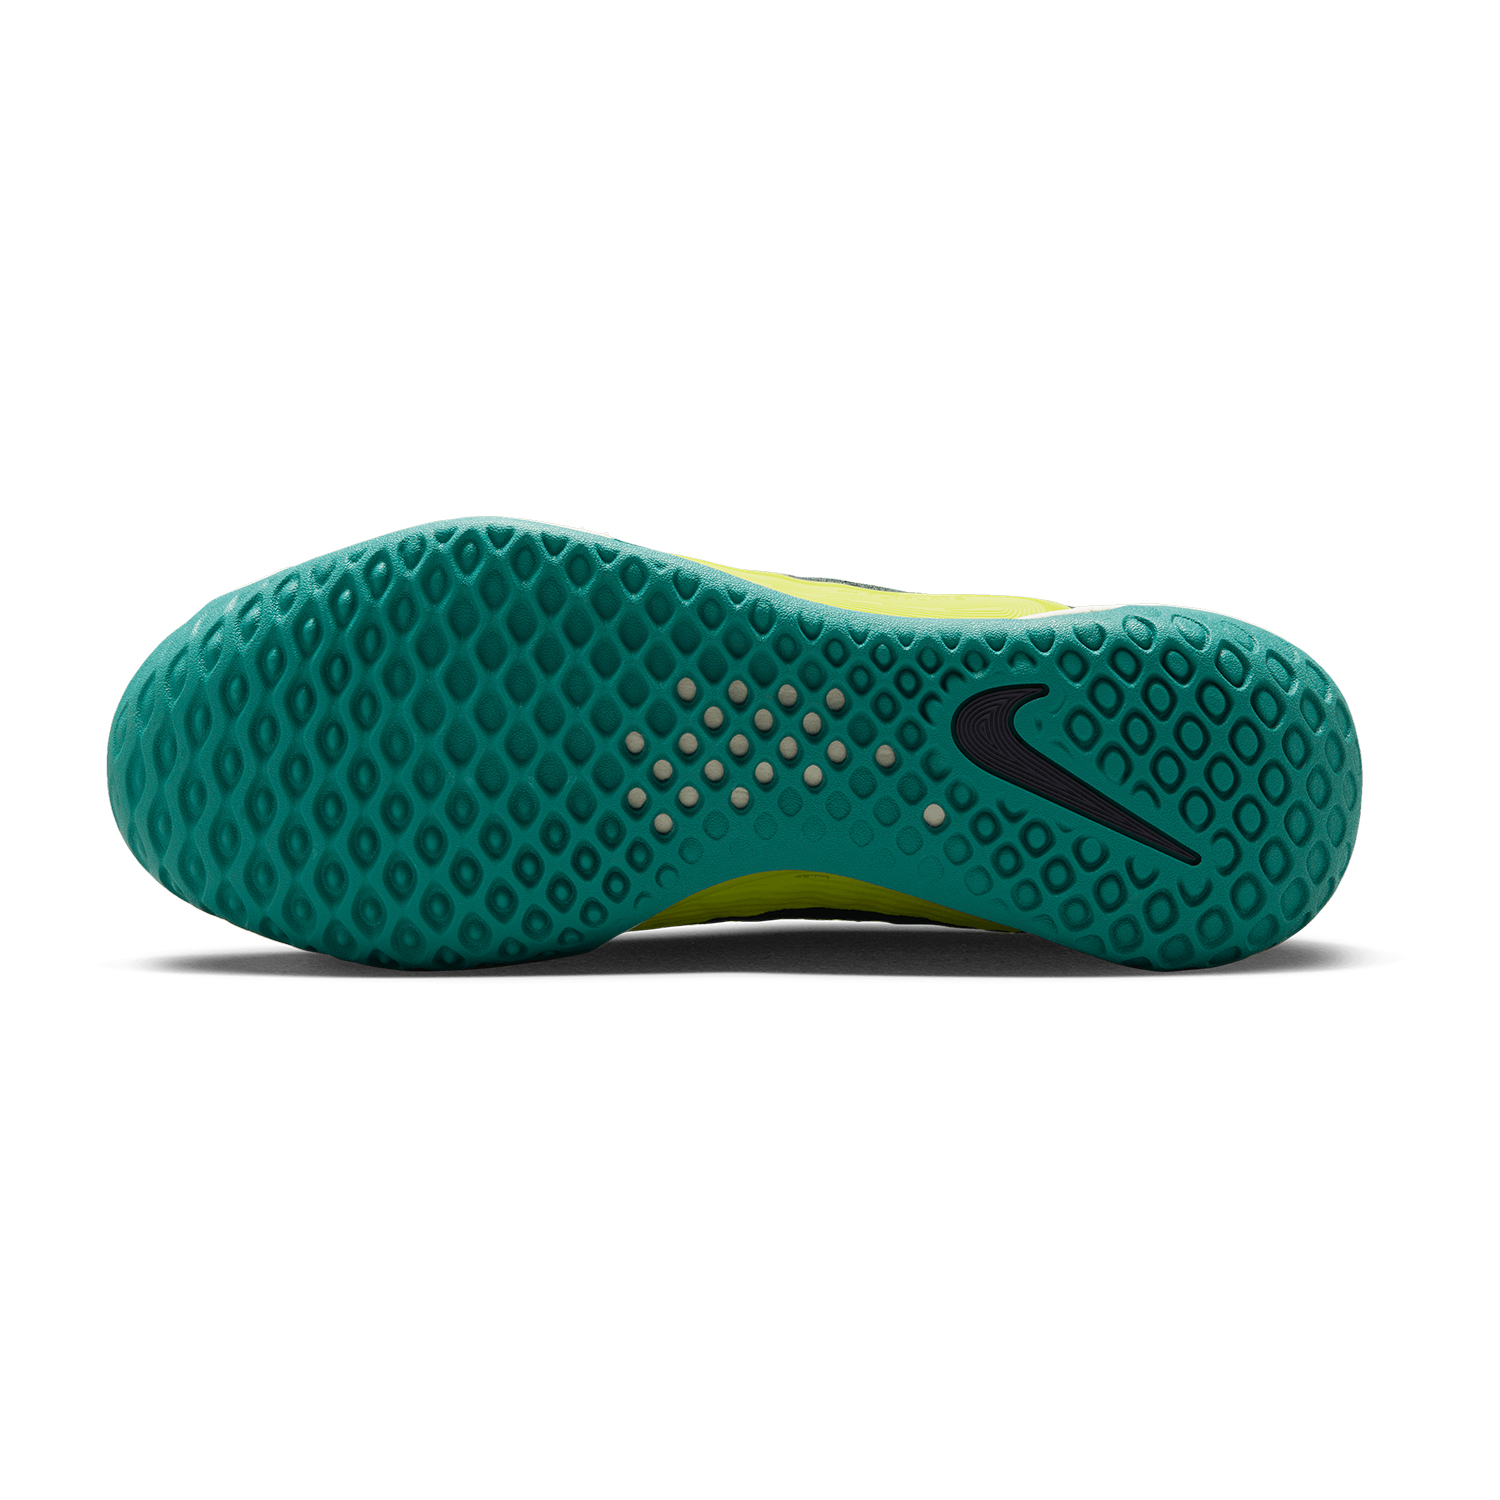 Nike Court Zoom NXT HC Men's Tennis Shoes - Mineral Teal/Sail